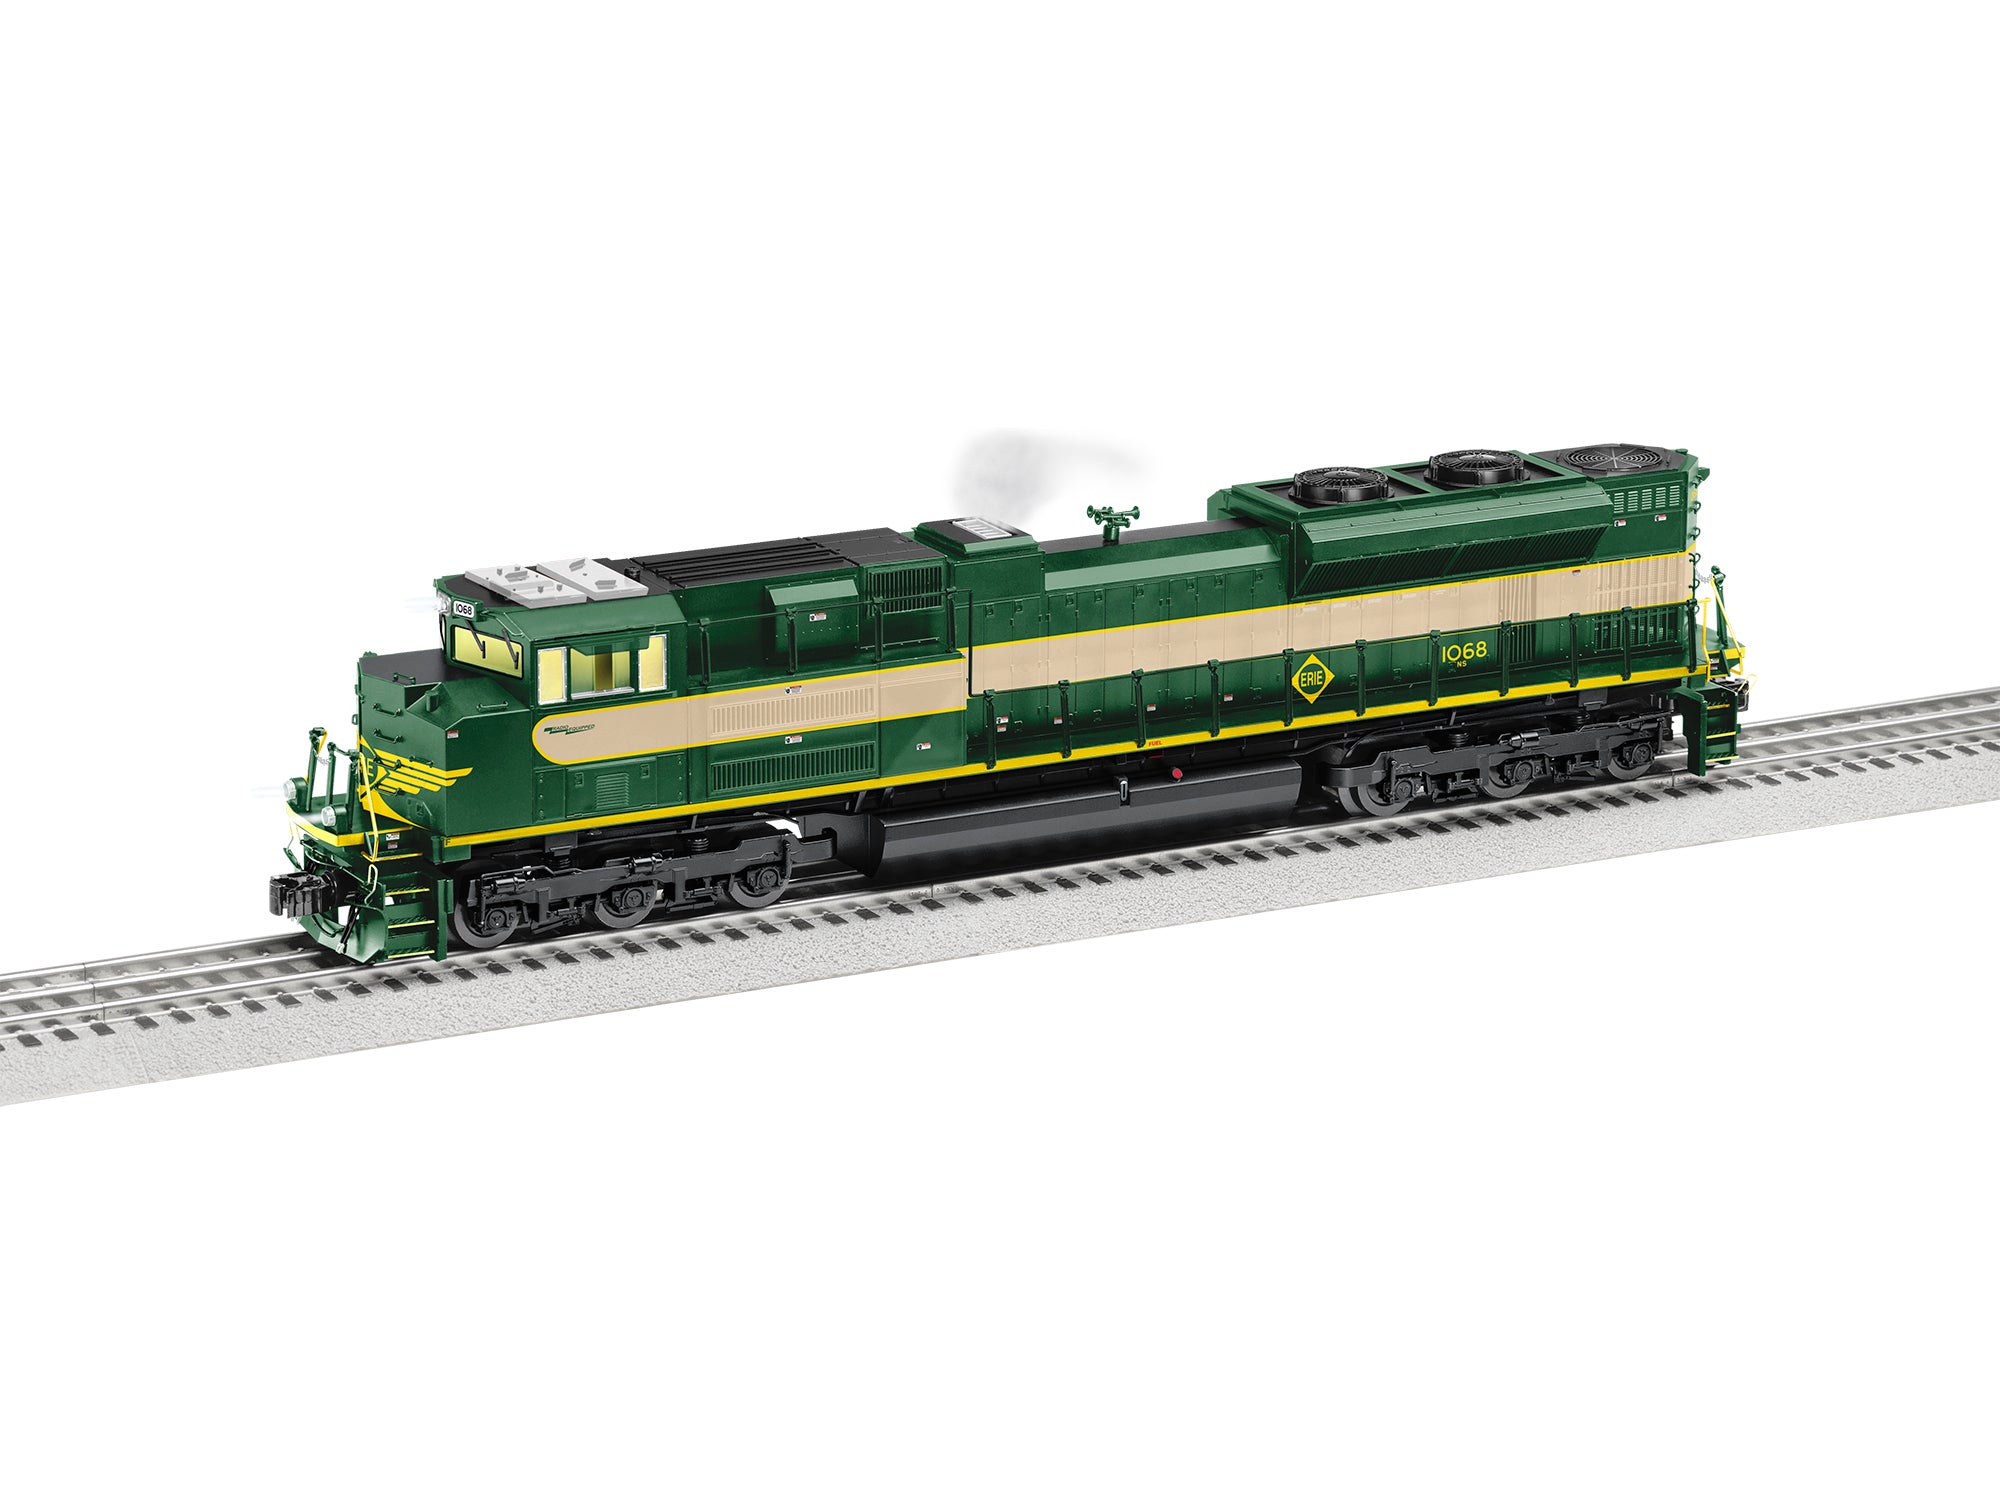 Lionel 2433060 - Legacy SD70ACE Diesel Engine "Erie" #1068 (Norfolk Southern)